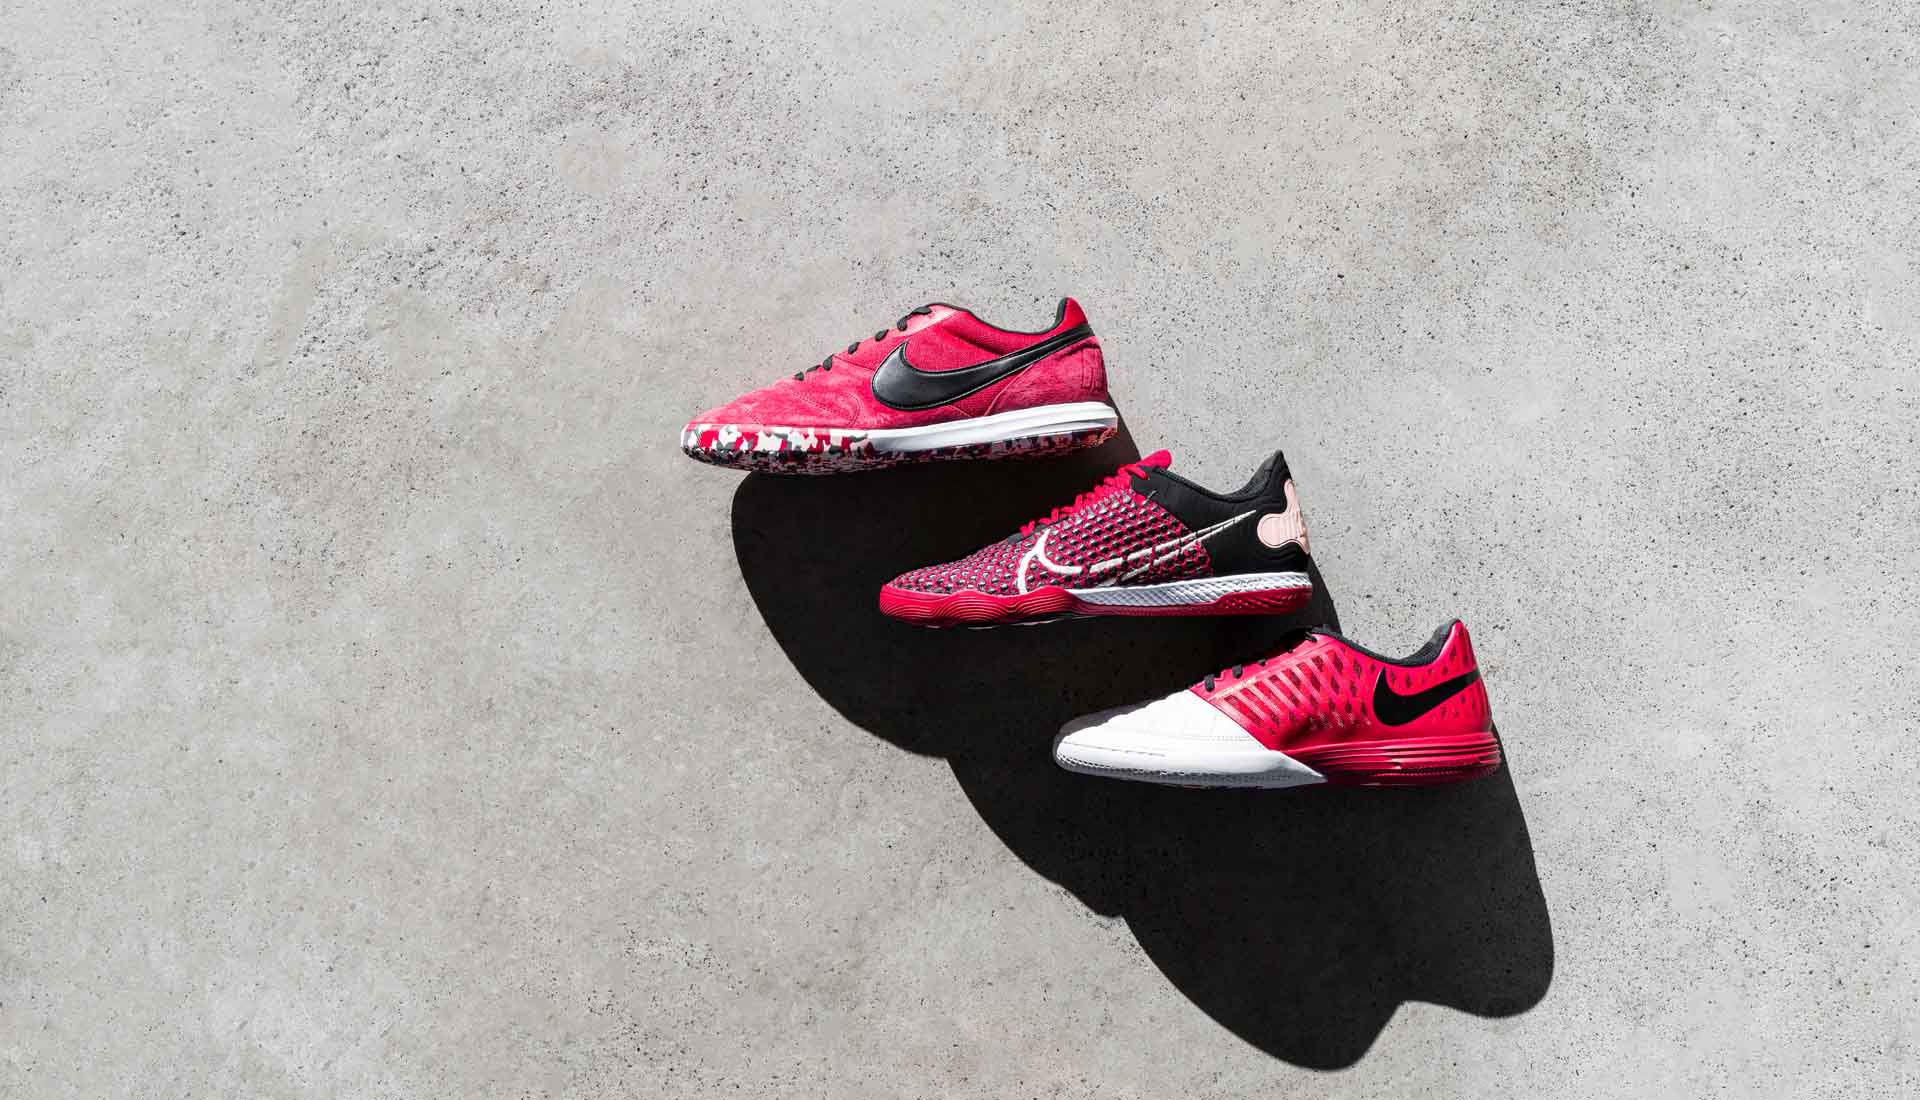 Nike Launch Seasonal Red Refresh For The Small-Sided Game - SoccerBible